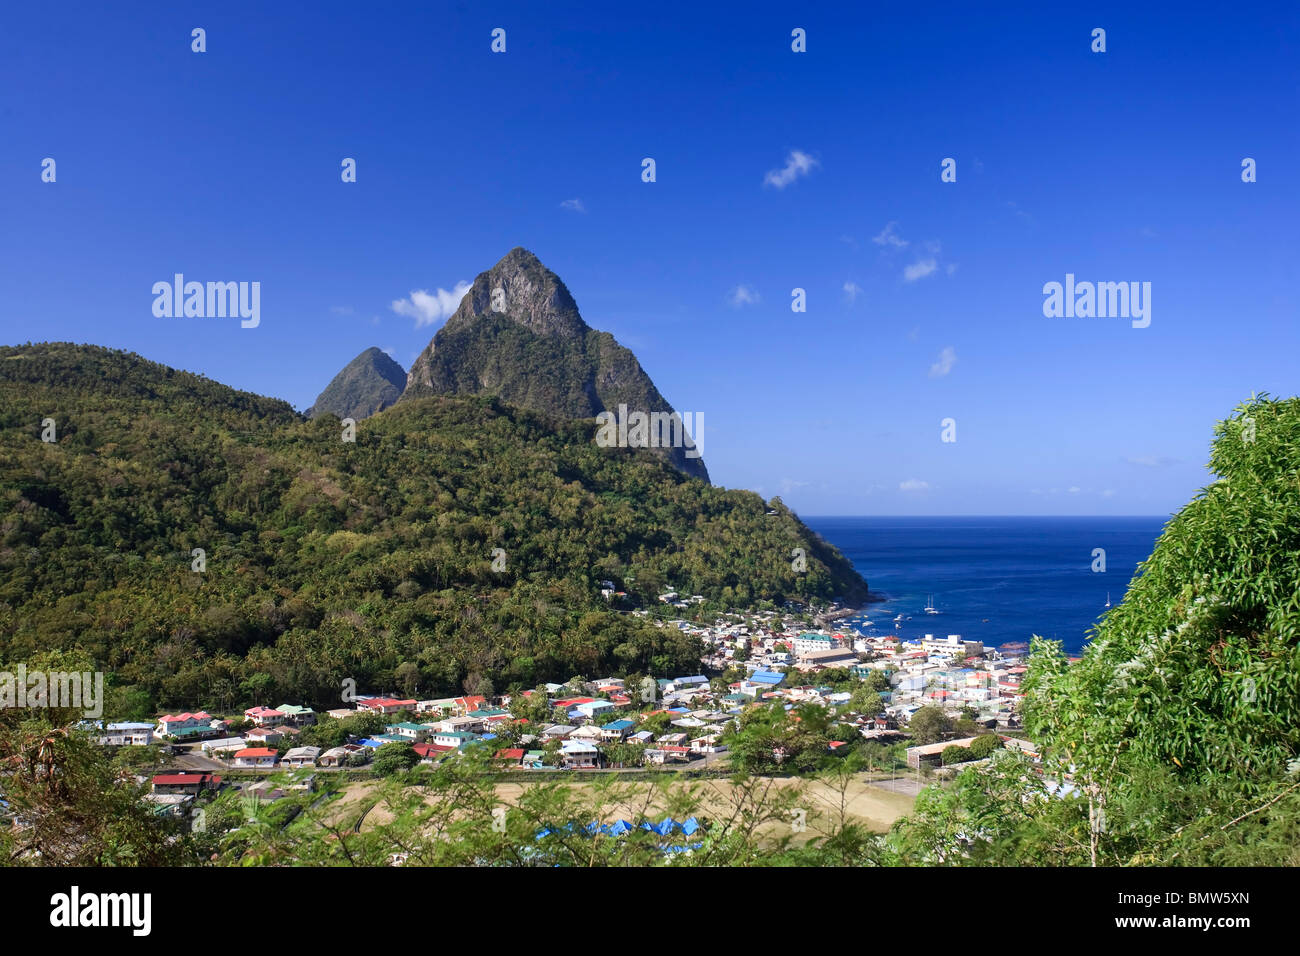 Caribbean, St Lucia, Petit and Gros Piton Mountains (UNESCO World Heritage Site) and town of Soufriere Stock Photo